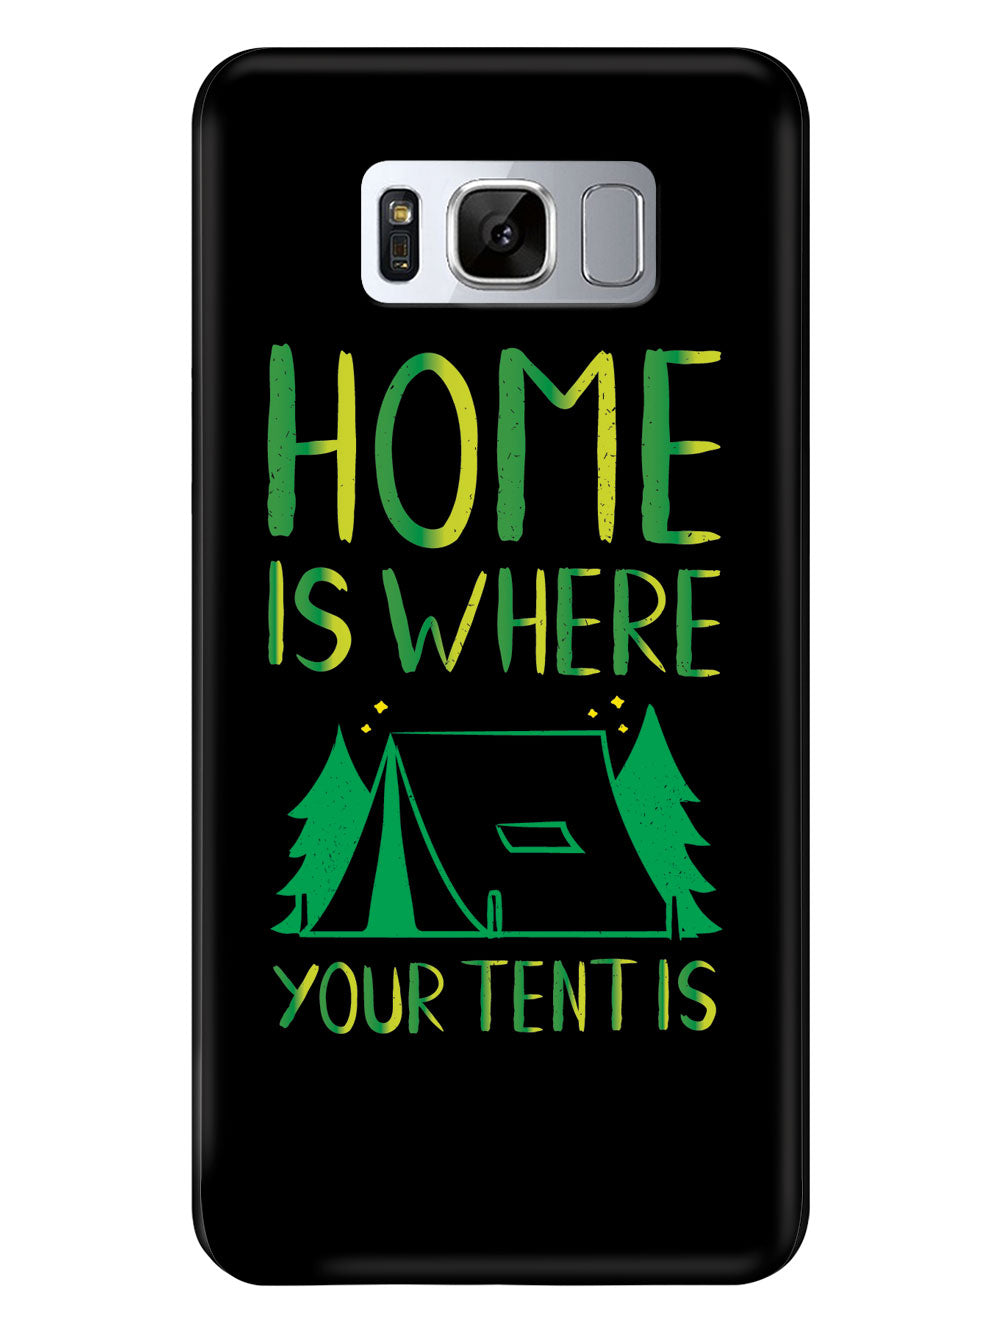 Home Is Where Your Tent Is - Black Case